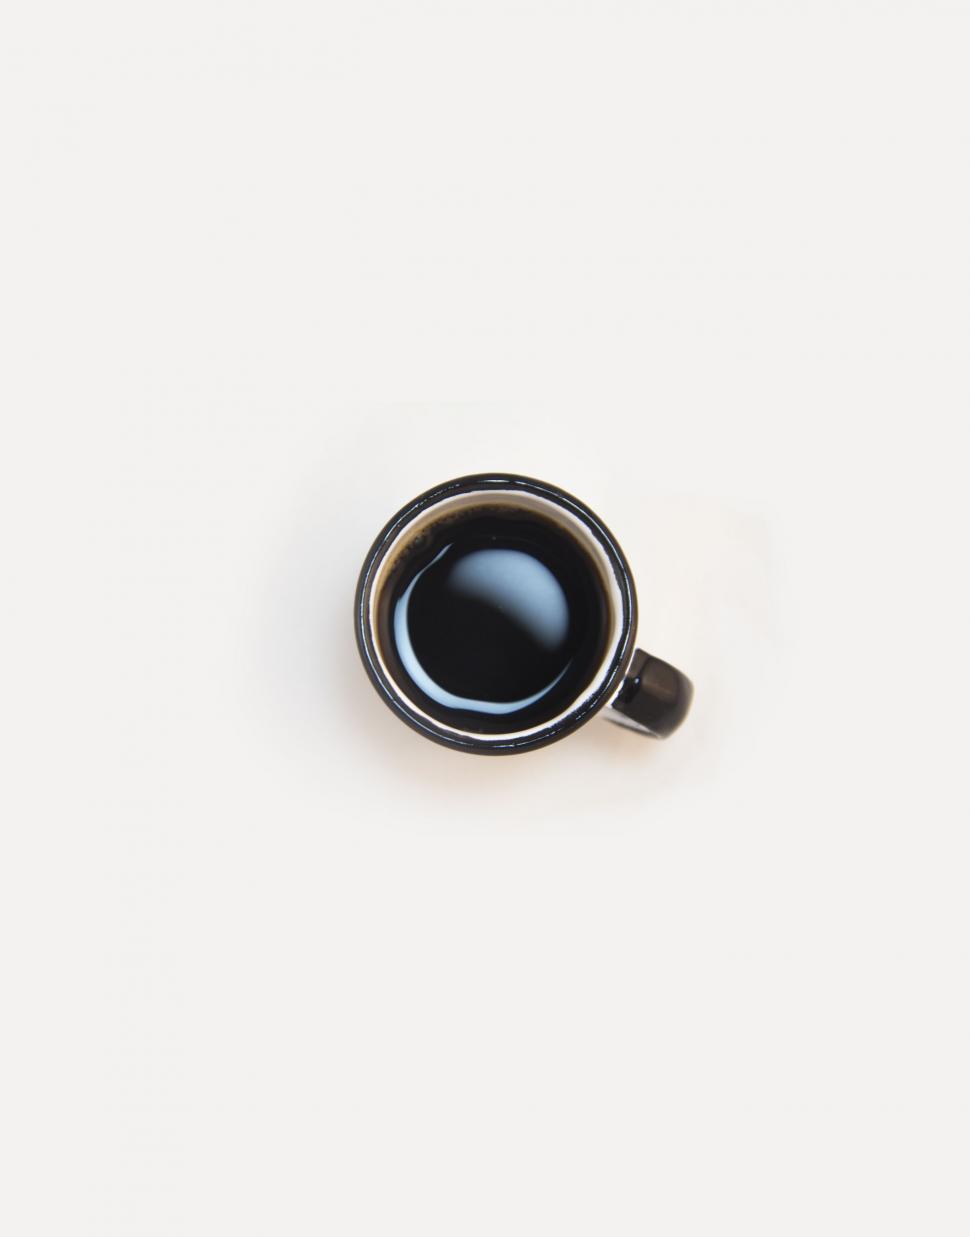 Free Image of A Cup of Coffee on a White Table 